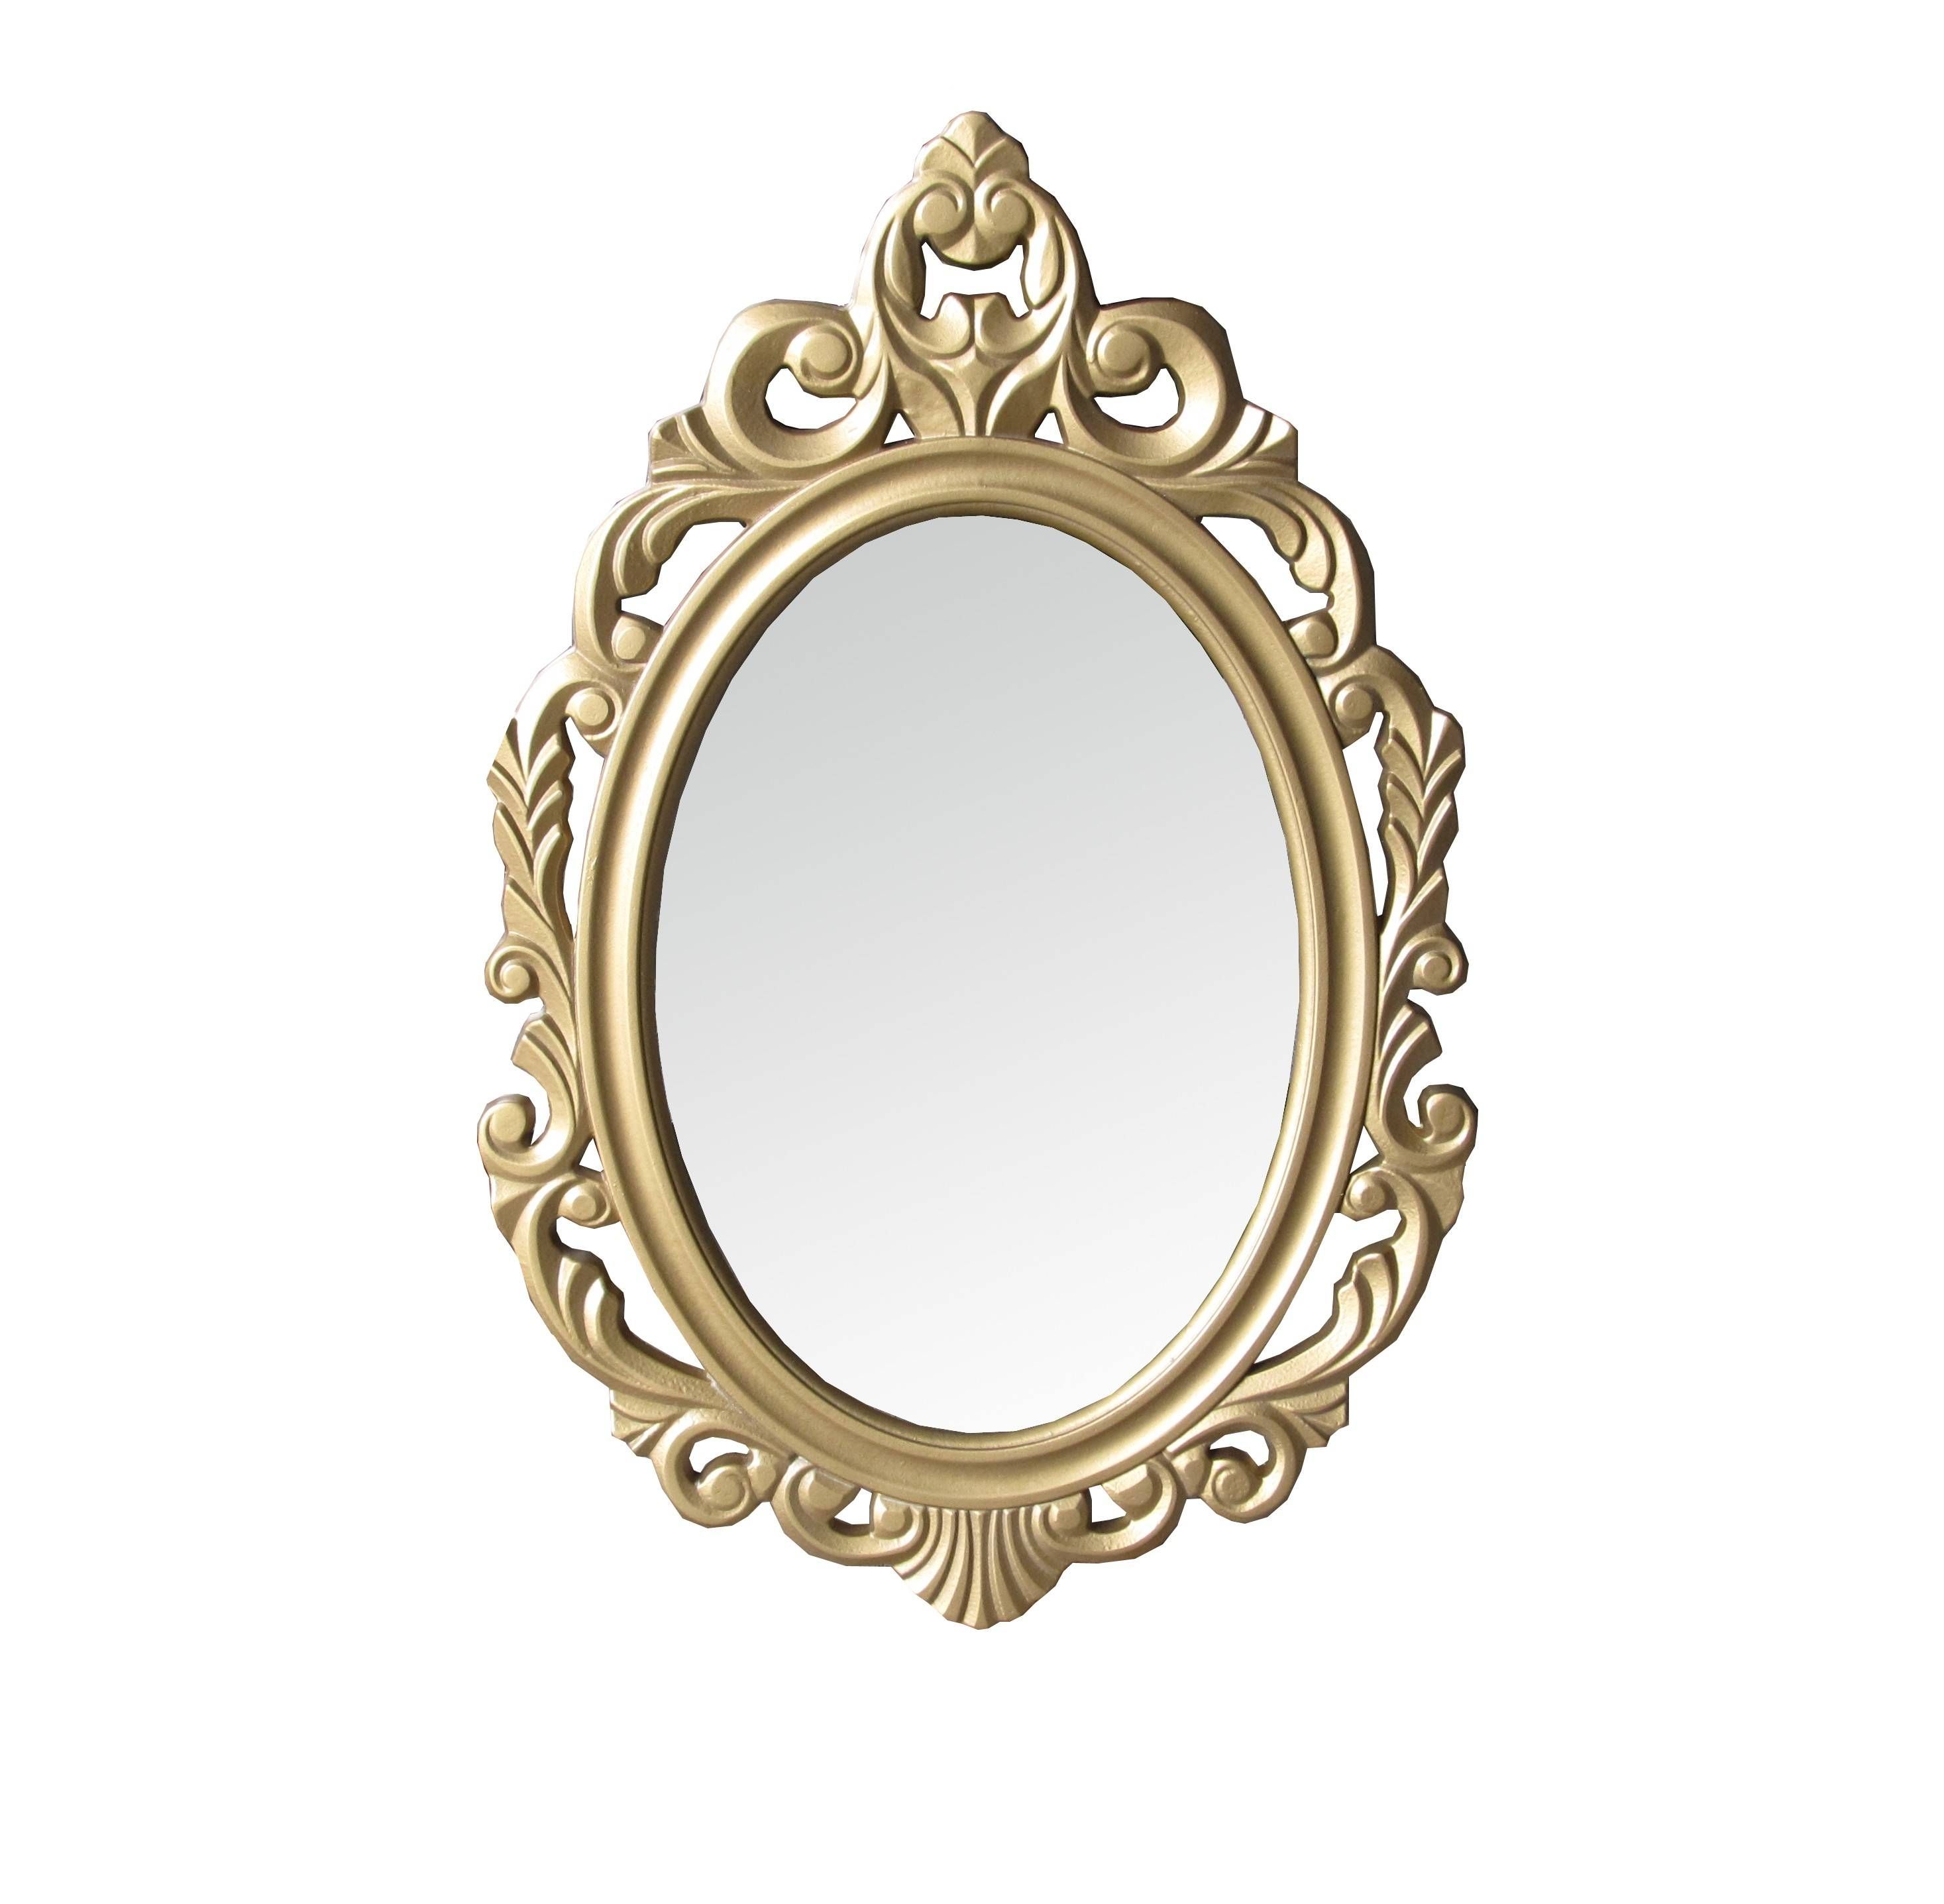 Interior & Decoration: Shabby Chic Ornate Gold Oval Wall Mirror With Regard To Ornate Gold Mirrors (View 15 of 25)